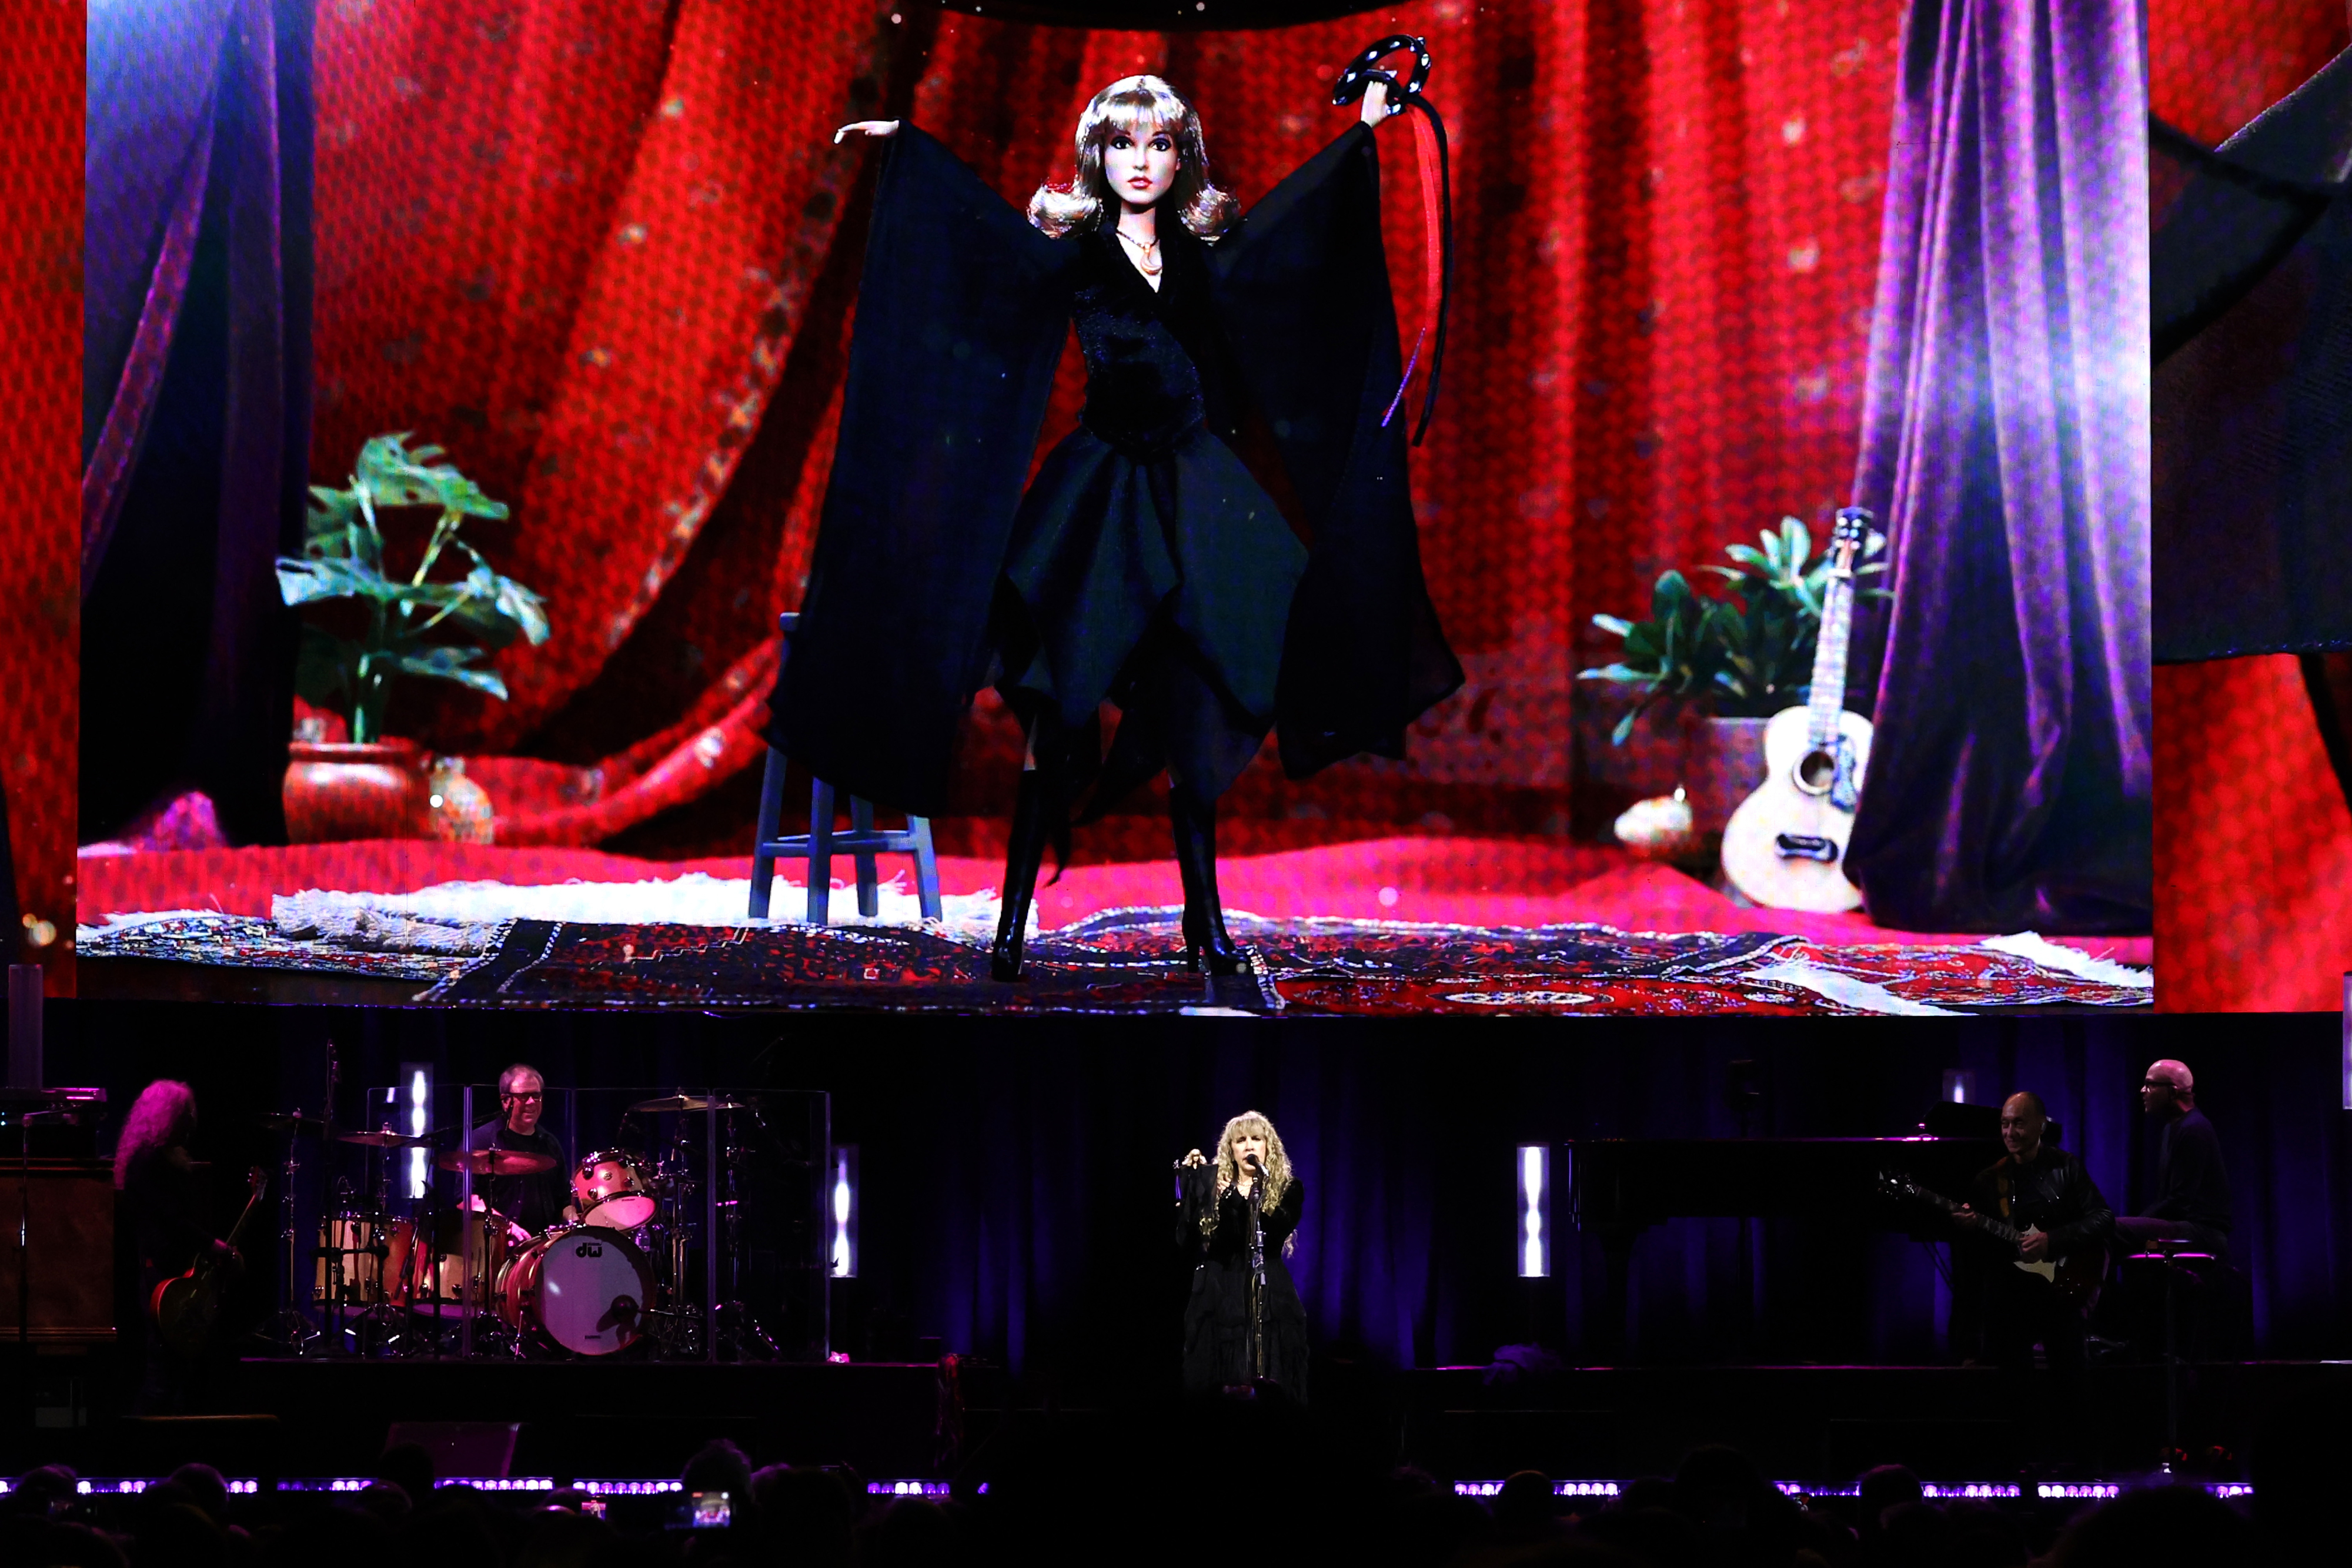 Stevie Nicks onstage with the Barbie doll on a screen above her